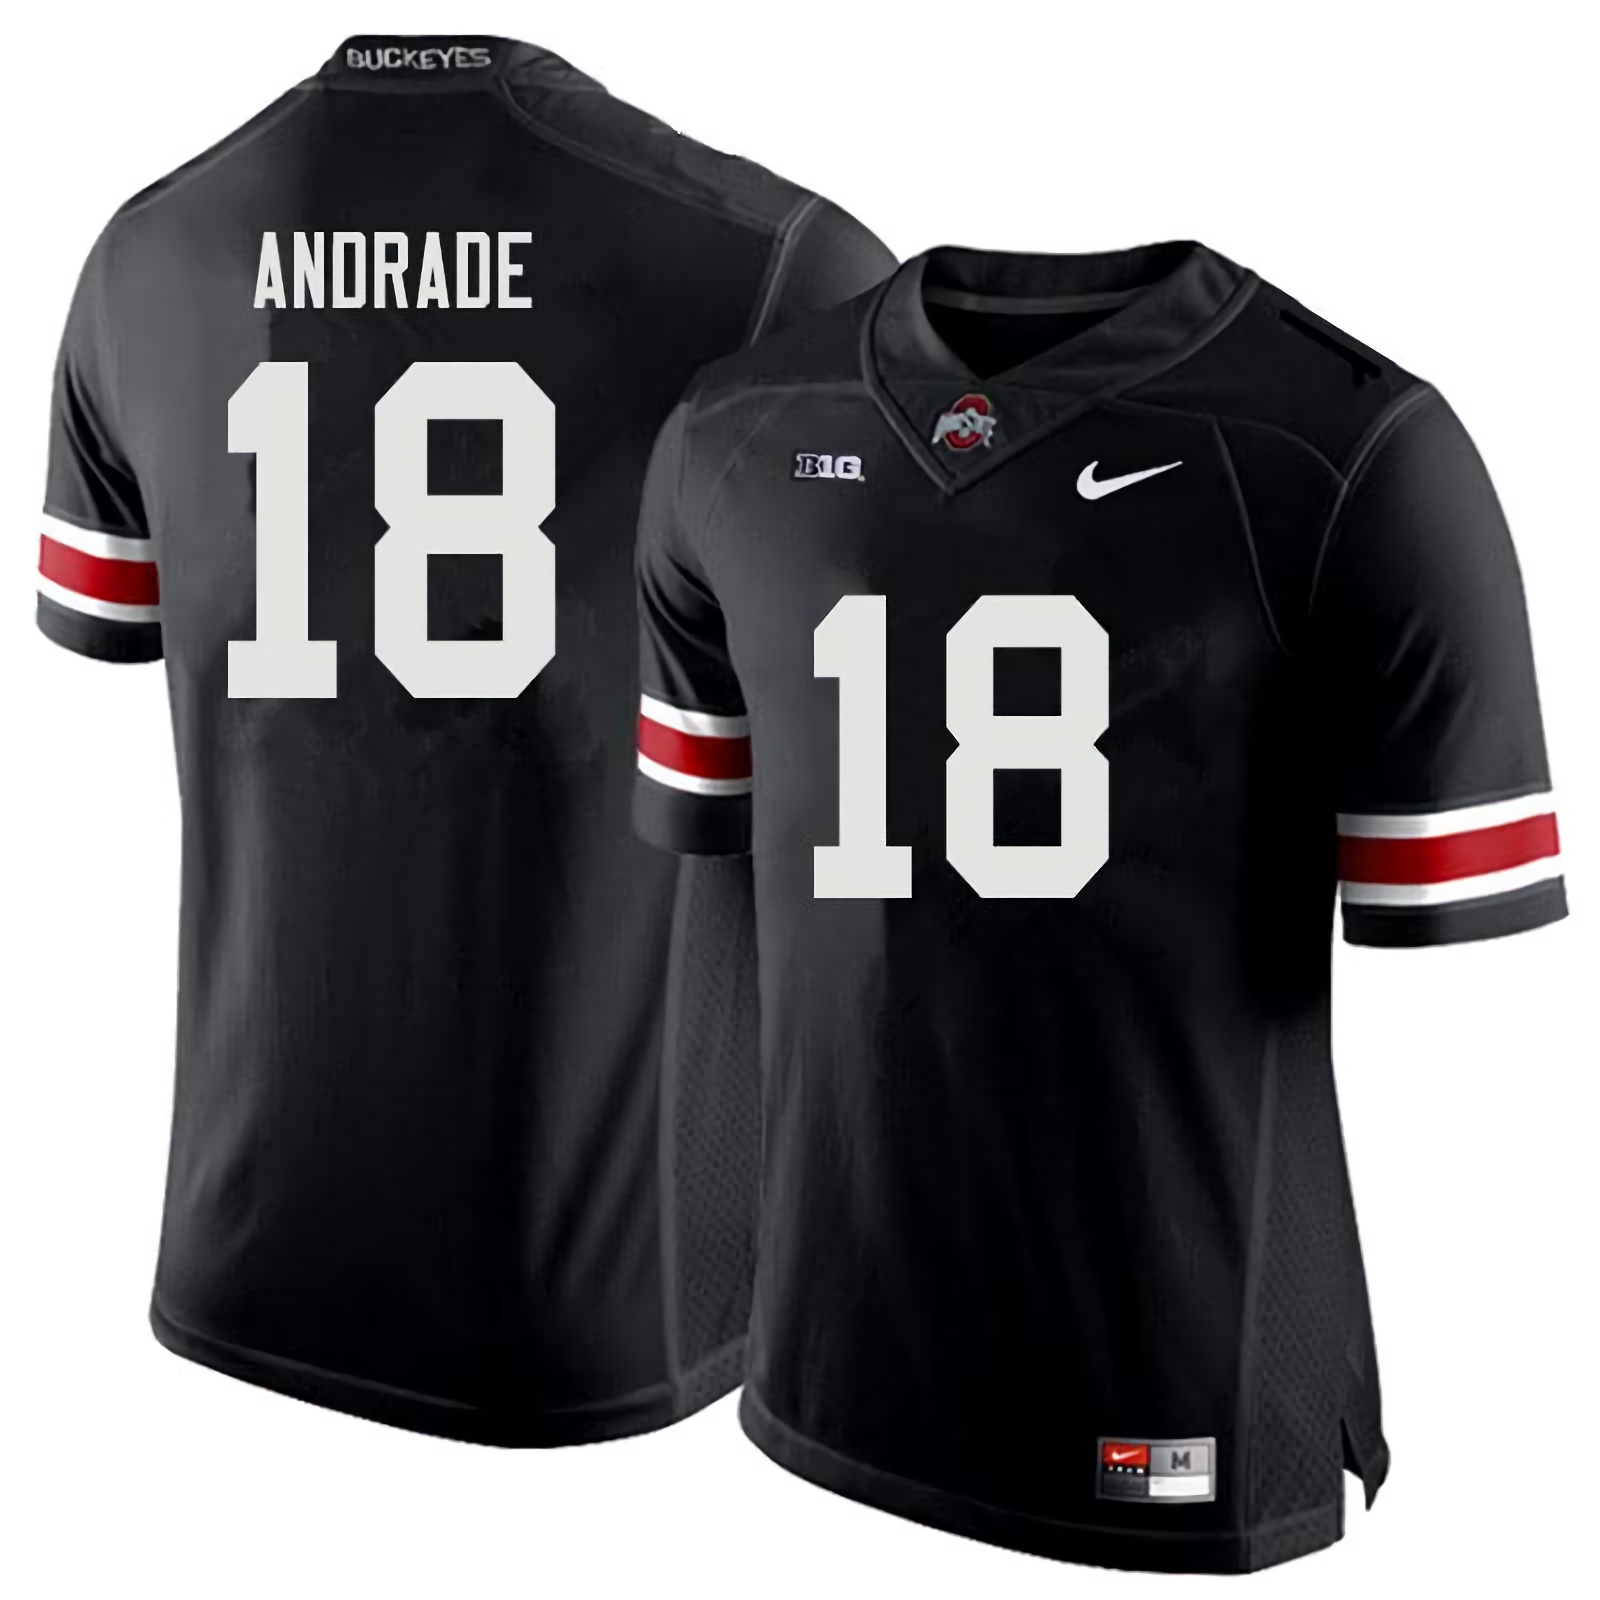 J.P. Andrade Ohio State Buckeyes Men's NCAA #18 Nike Black College Stitched Football Jersey LCB2656VY